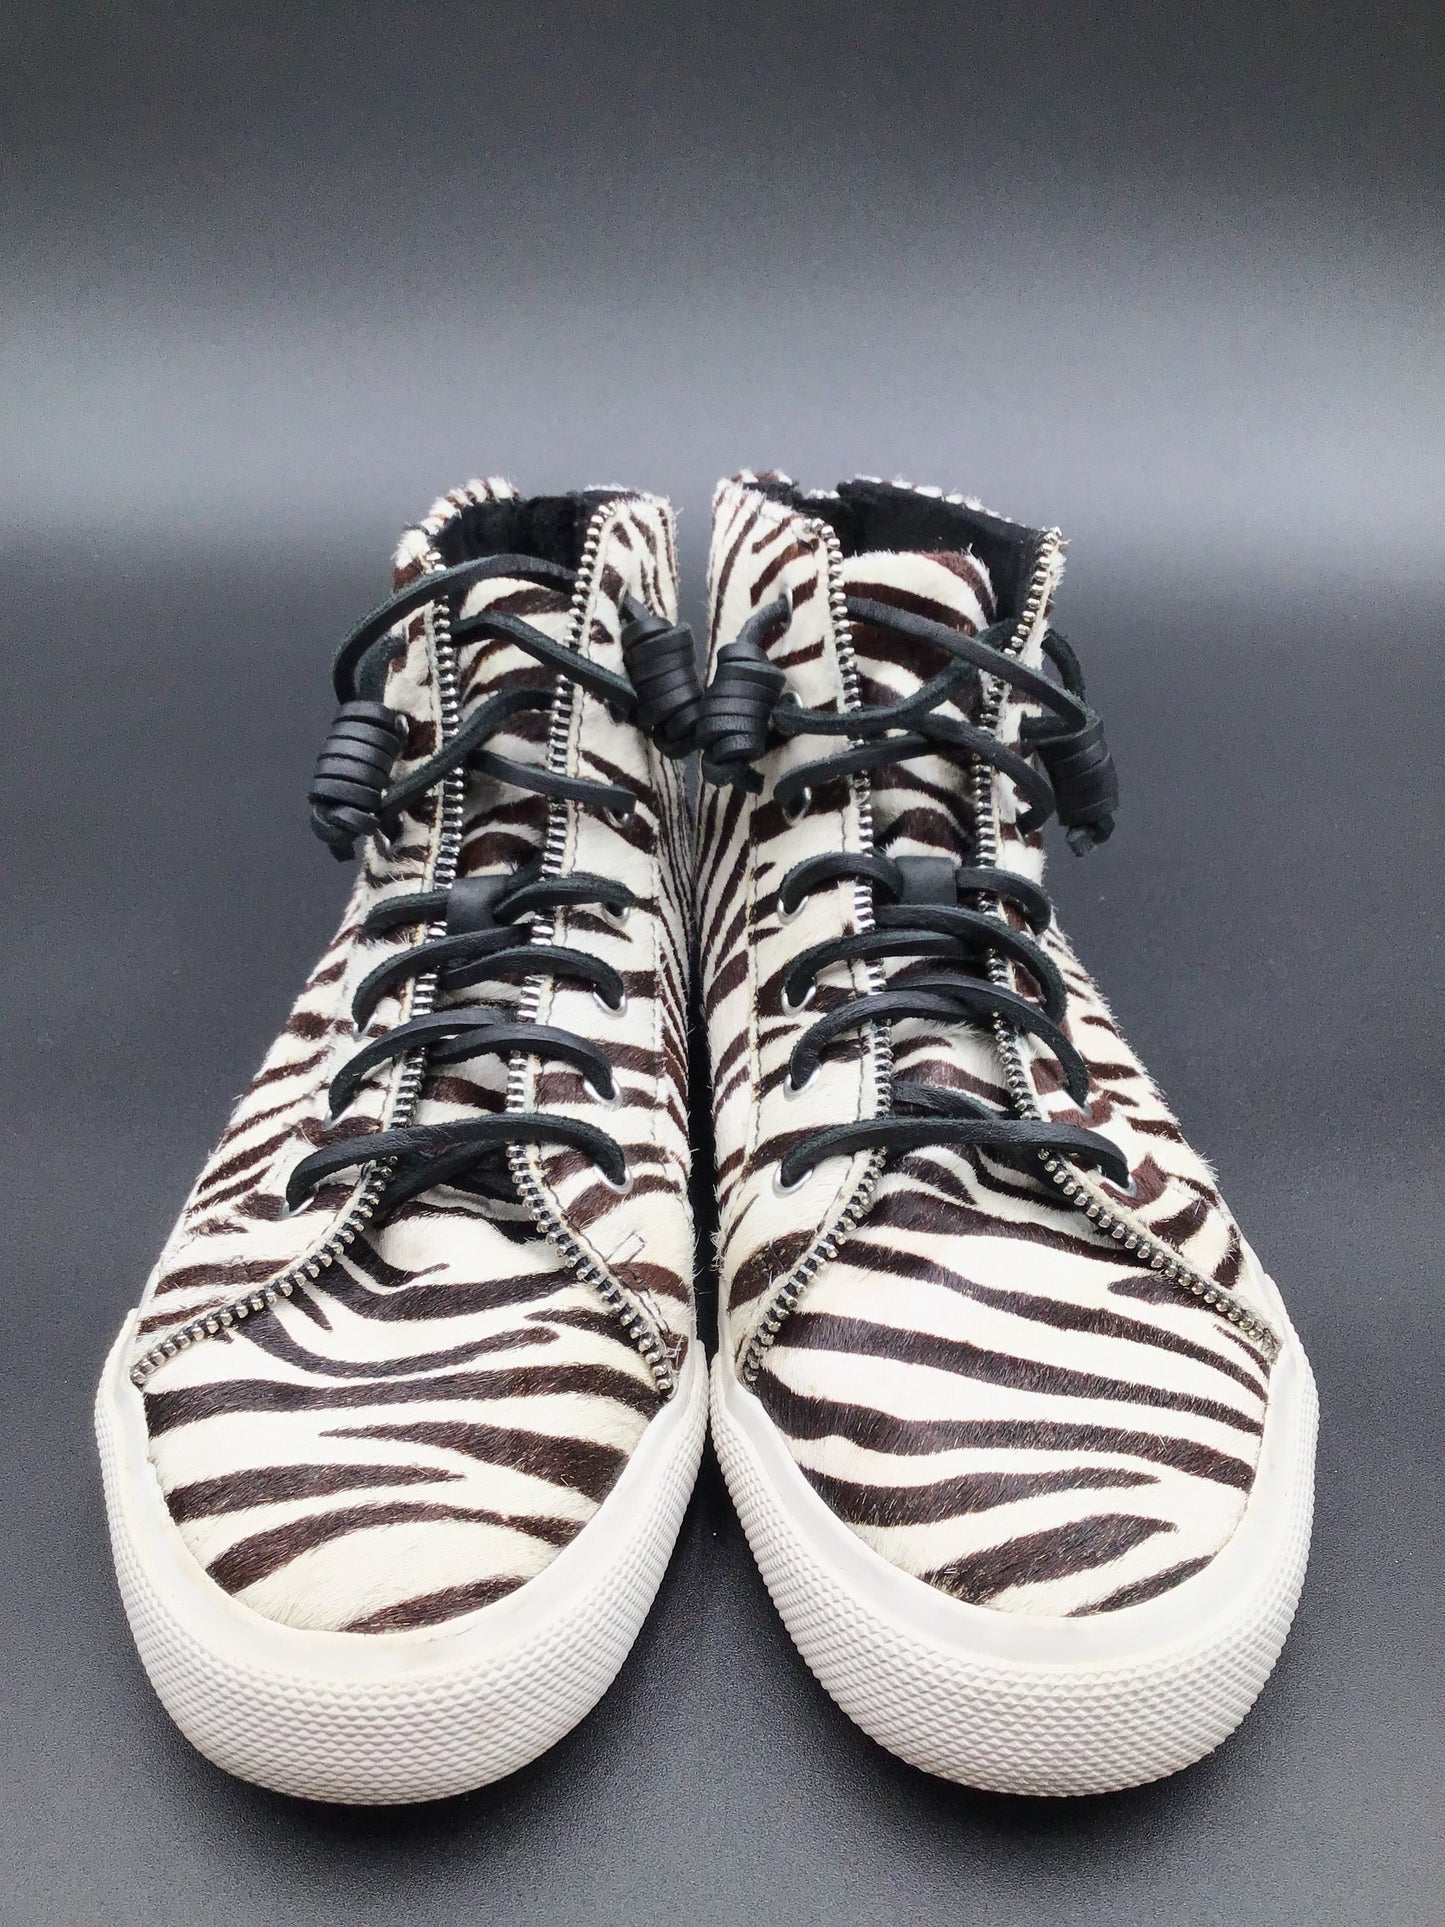 Zebra Print Shoes Sneakers Sperry, Size 9